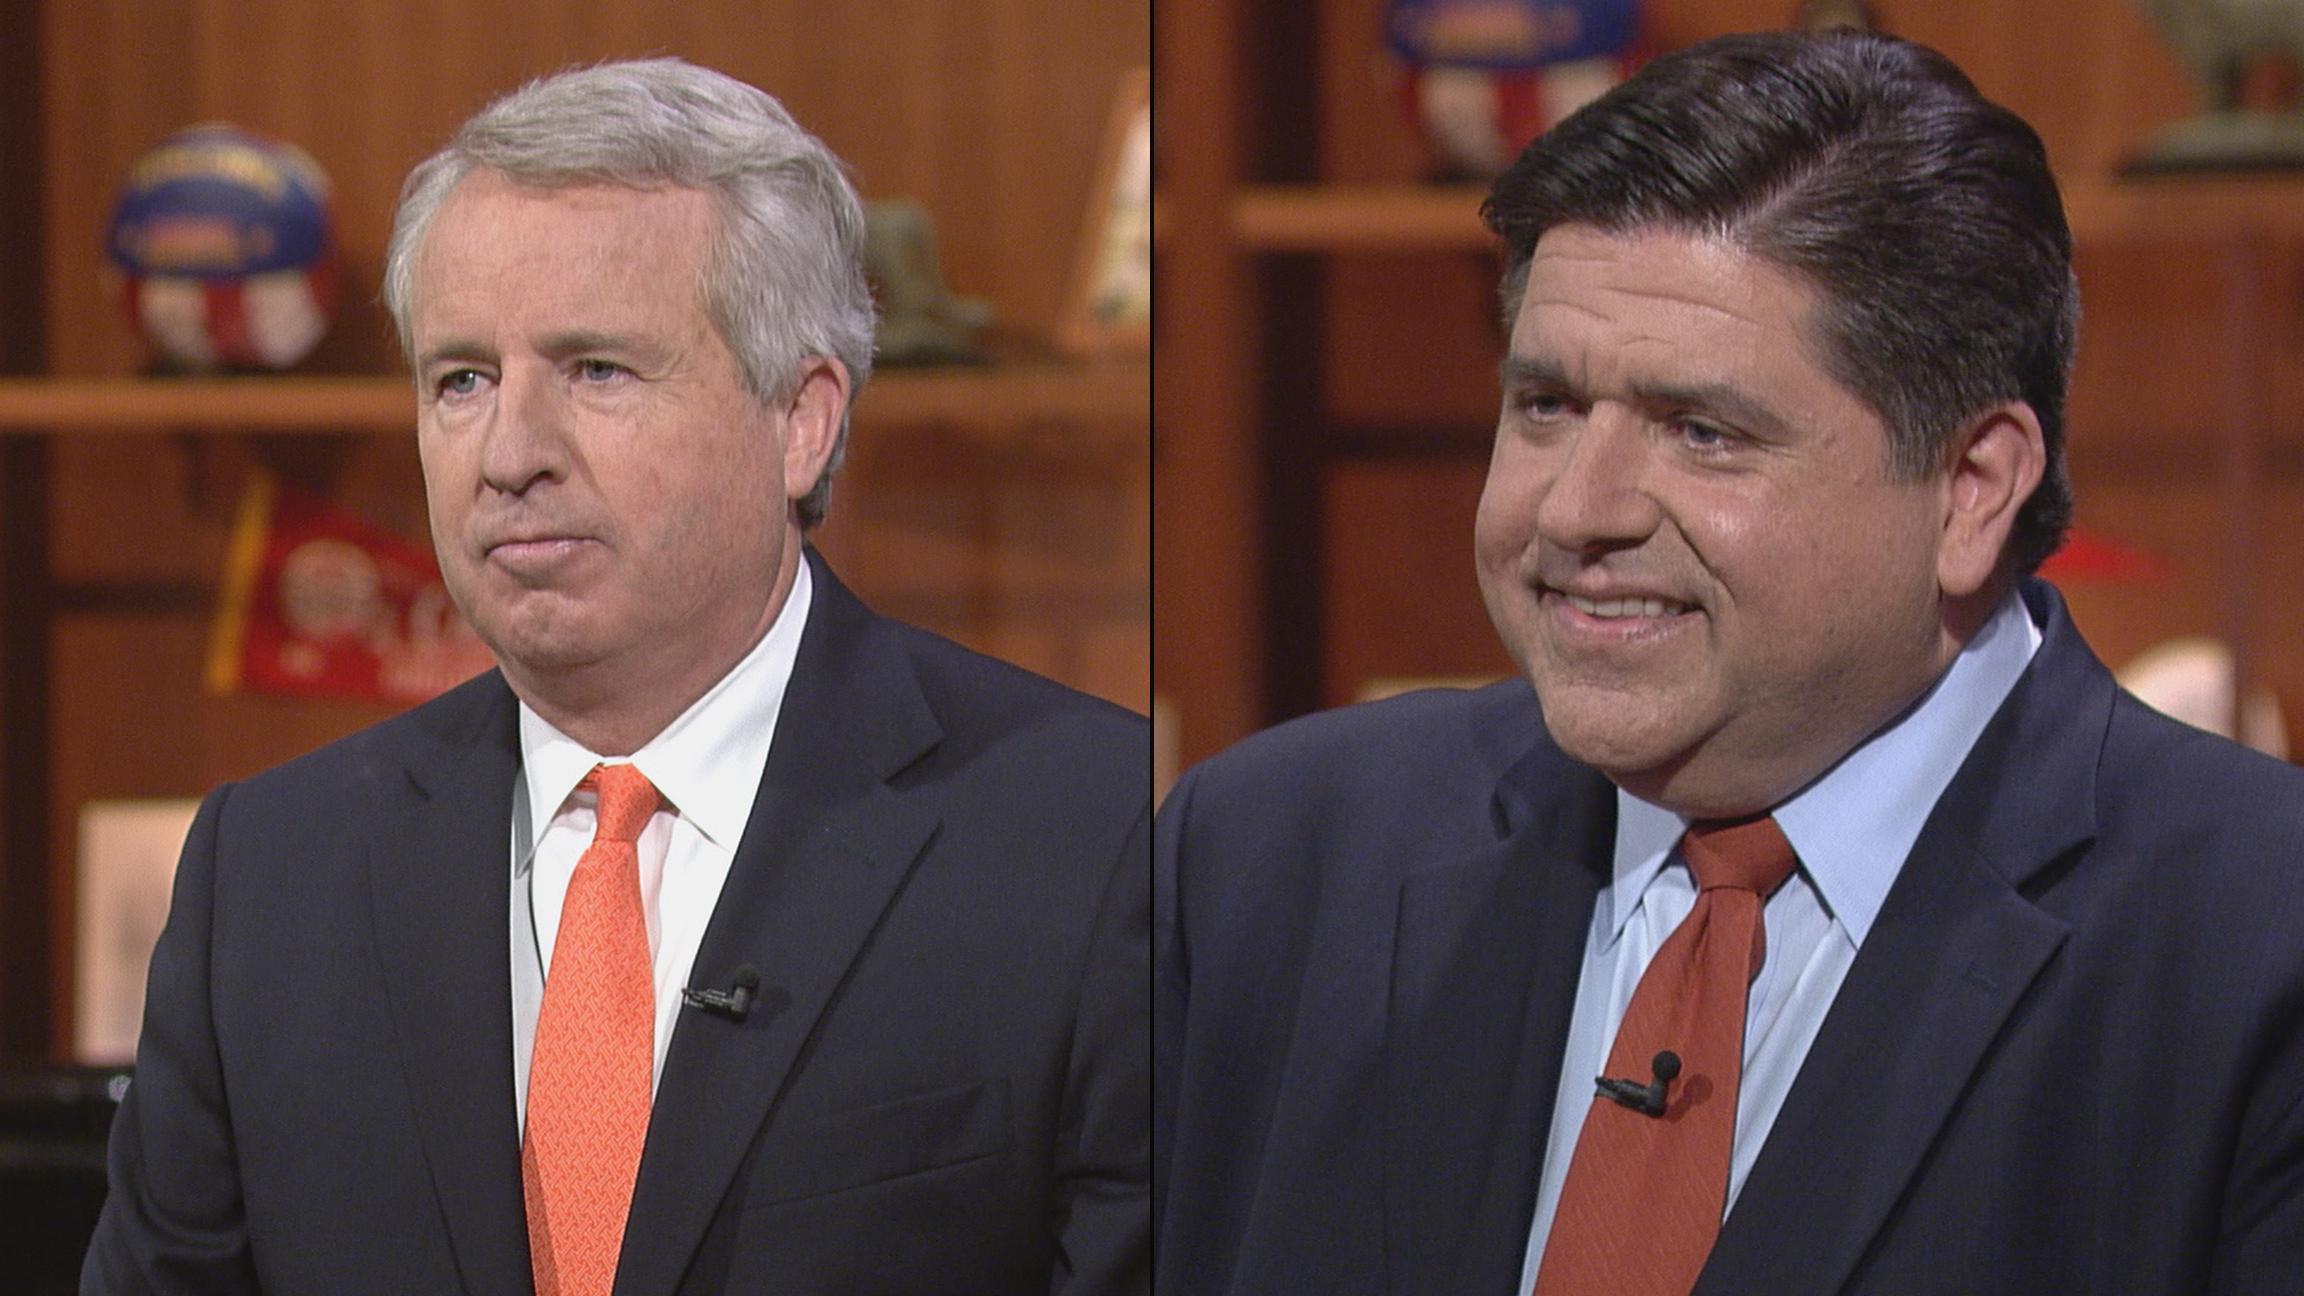 Candidates for Illinois governor Chris Kennedy, left, and J.B. Pritzker appear on “Chicago Tonight” on June 22 and June 15, respectively.